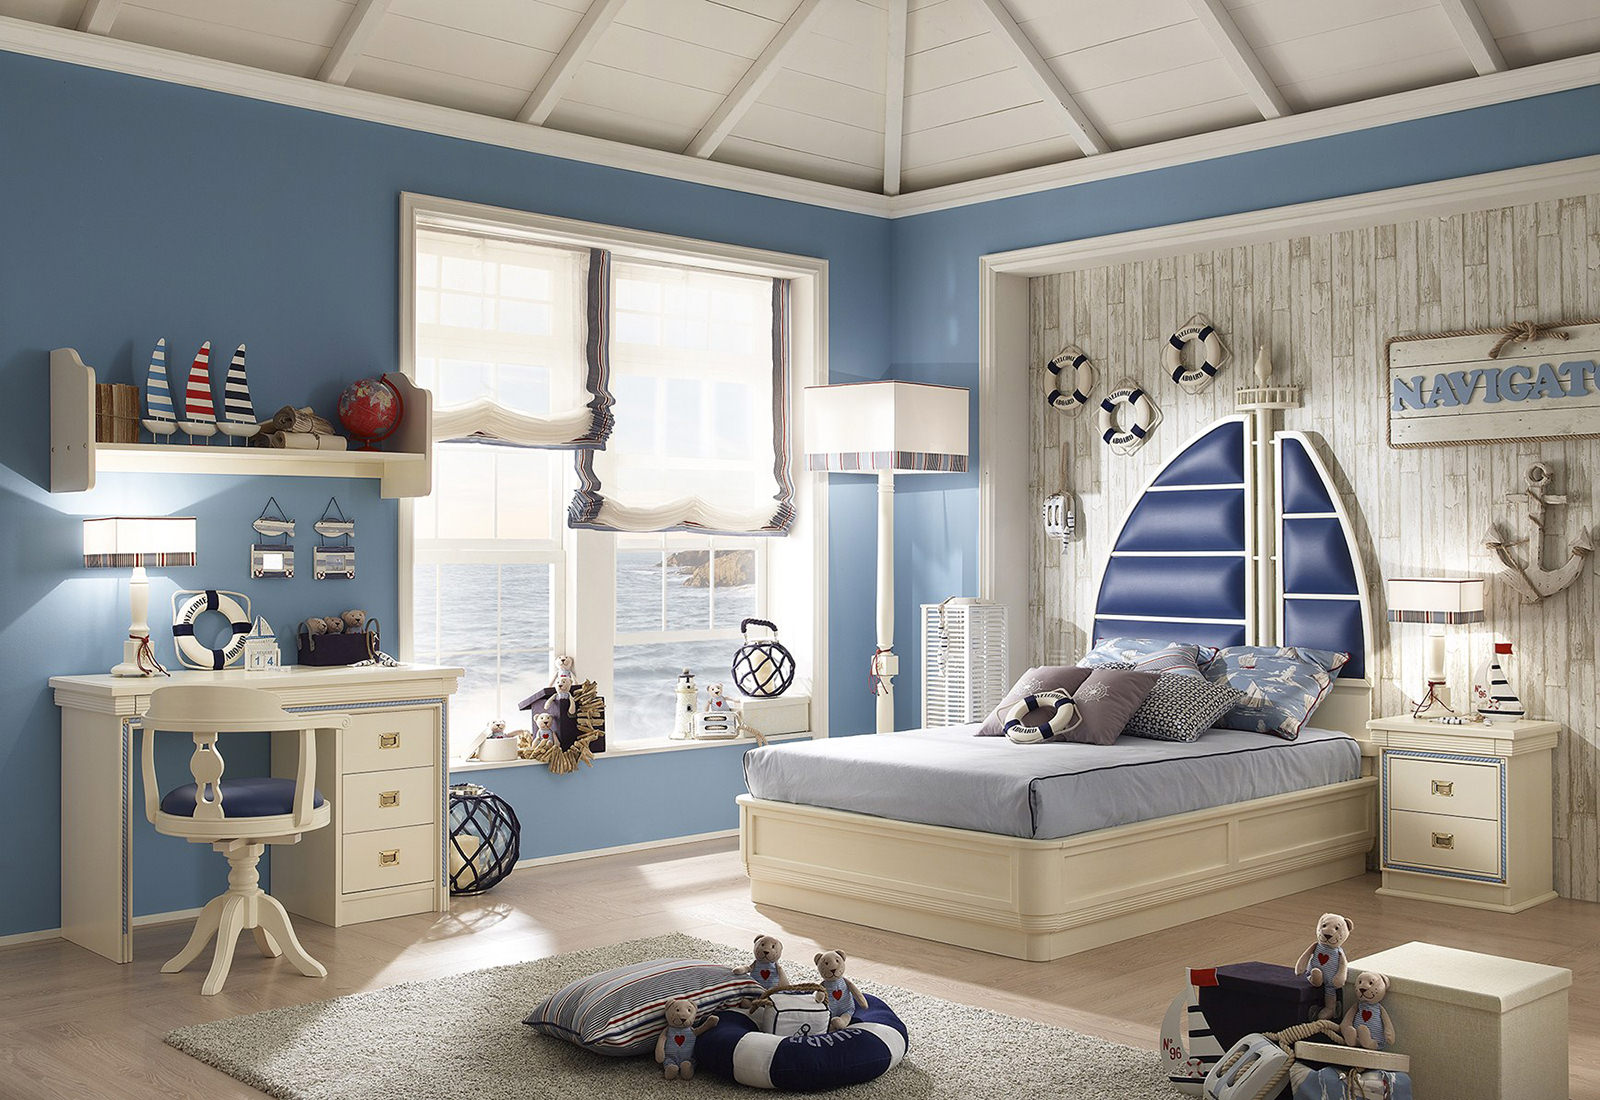 Features of the nursery decor for a boy in a marine style